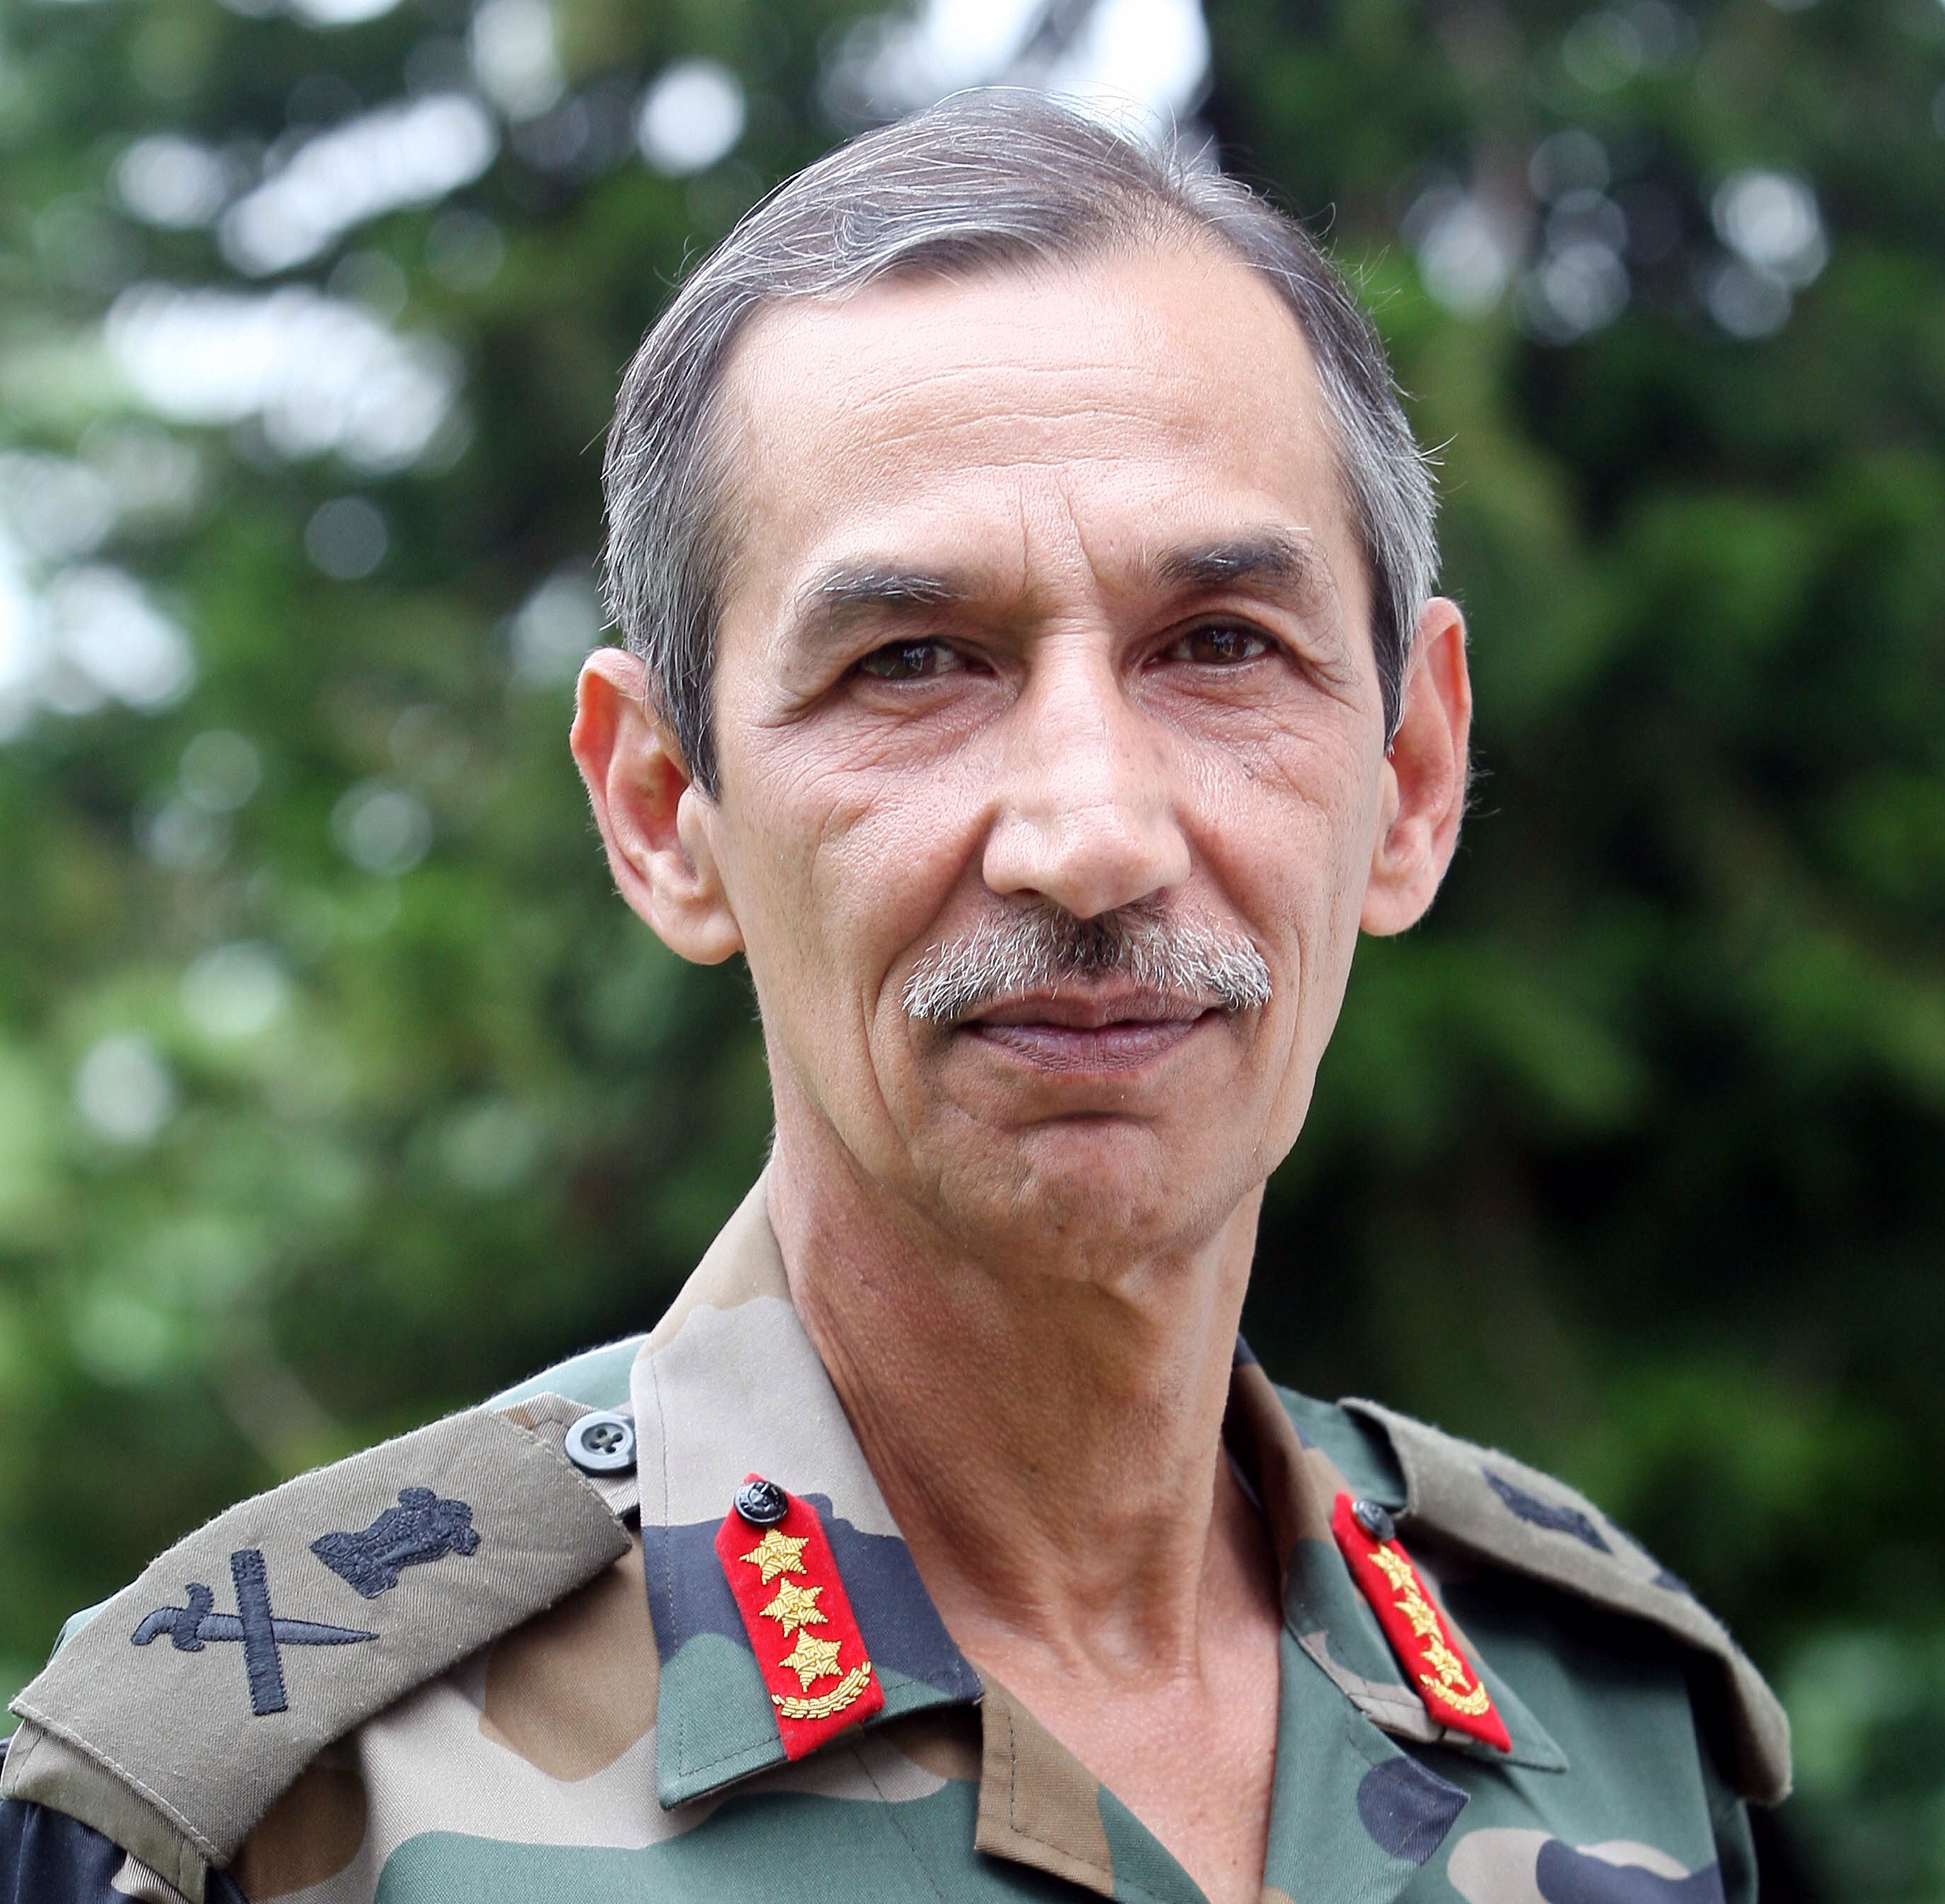 Indian army's apolitical nature is a blessing in disguise, says Lt Gen Hooda